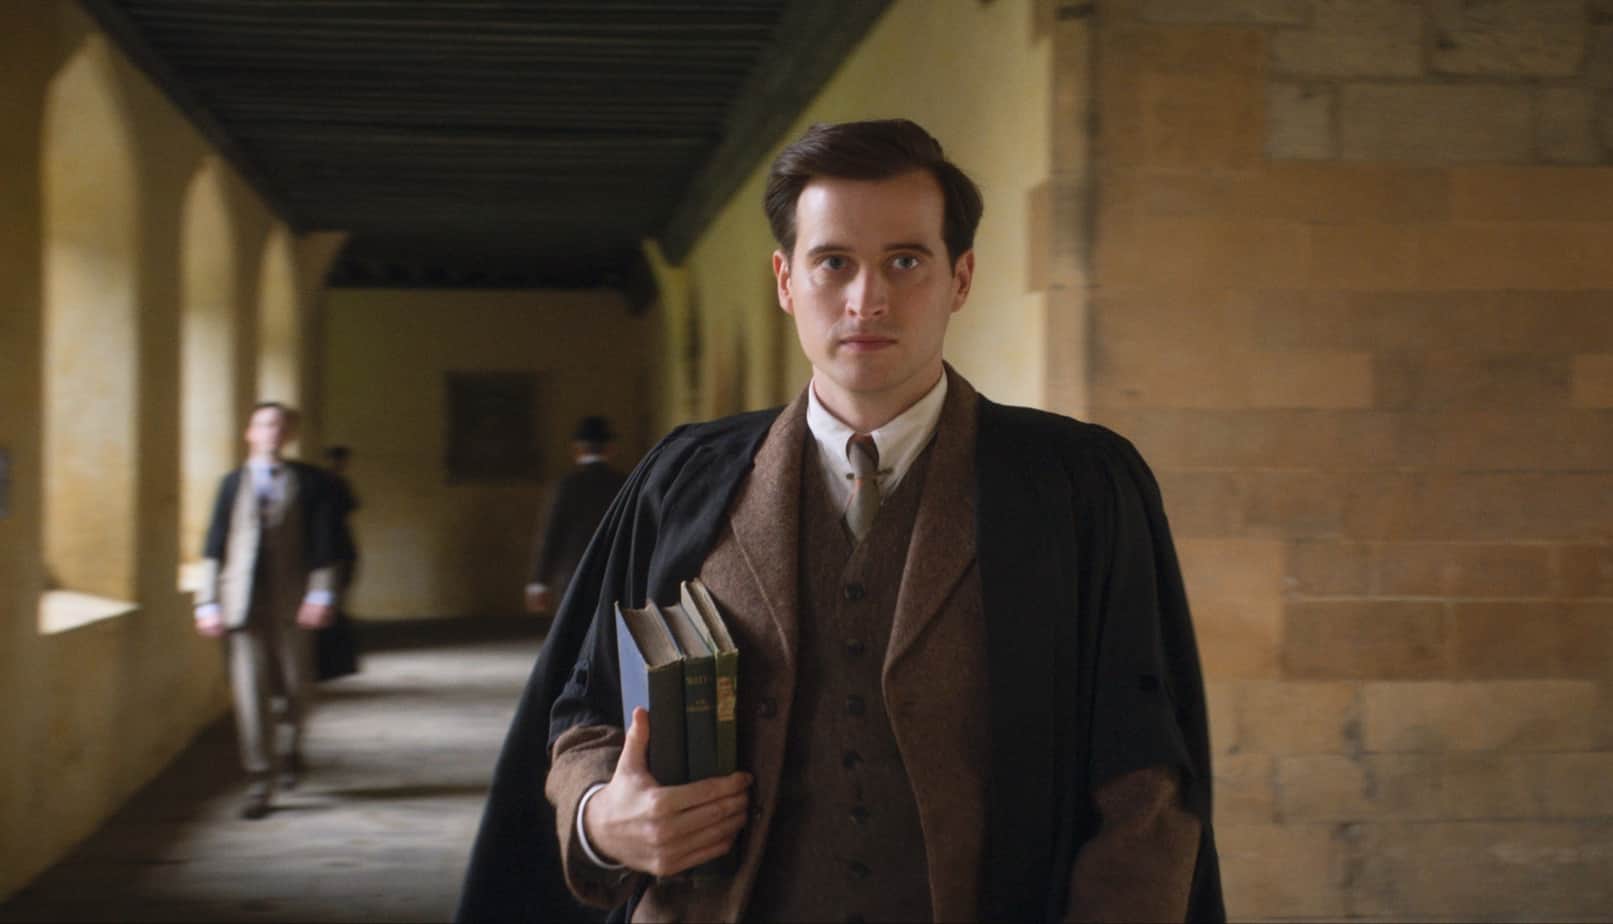 Biopic of CS Lewis, the Most Reluctant Convert launches in the UK